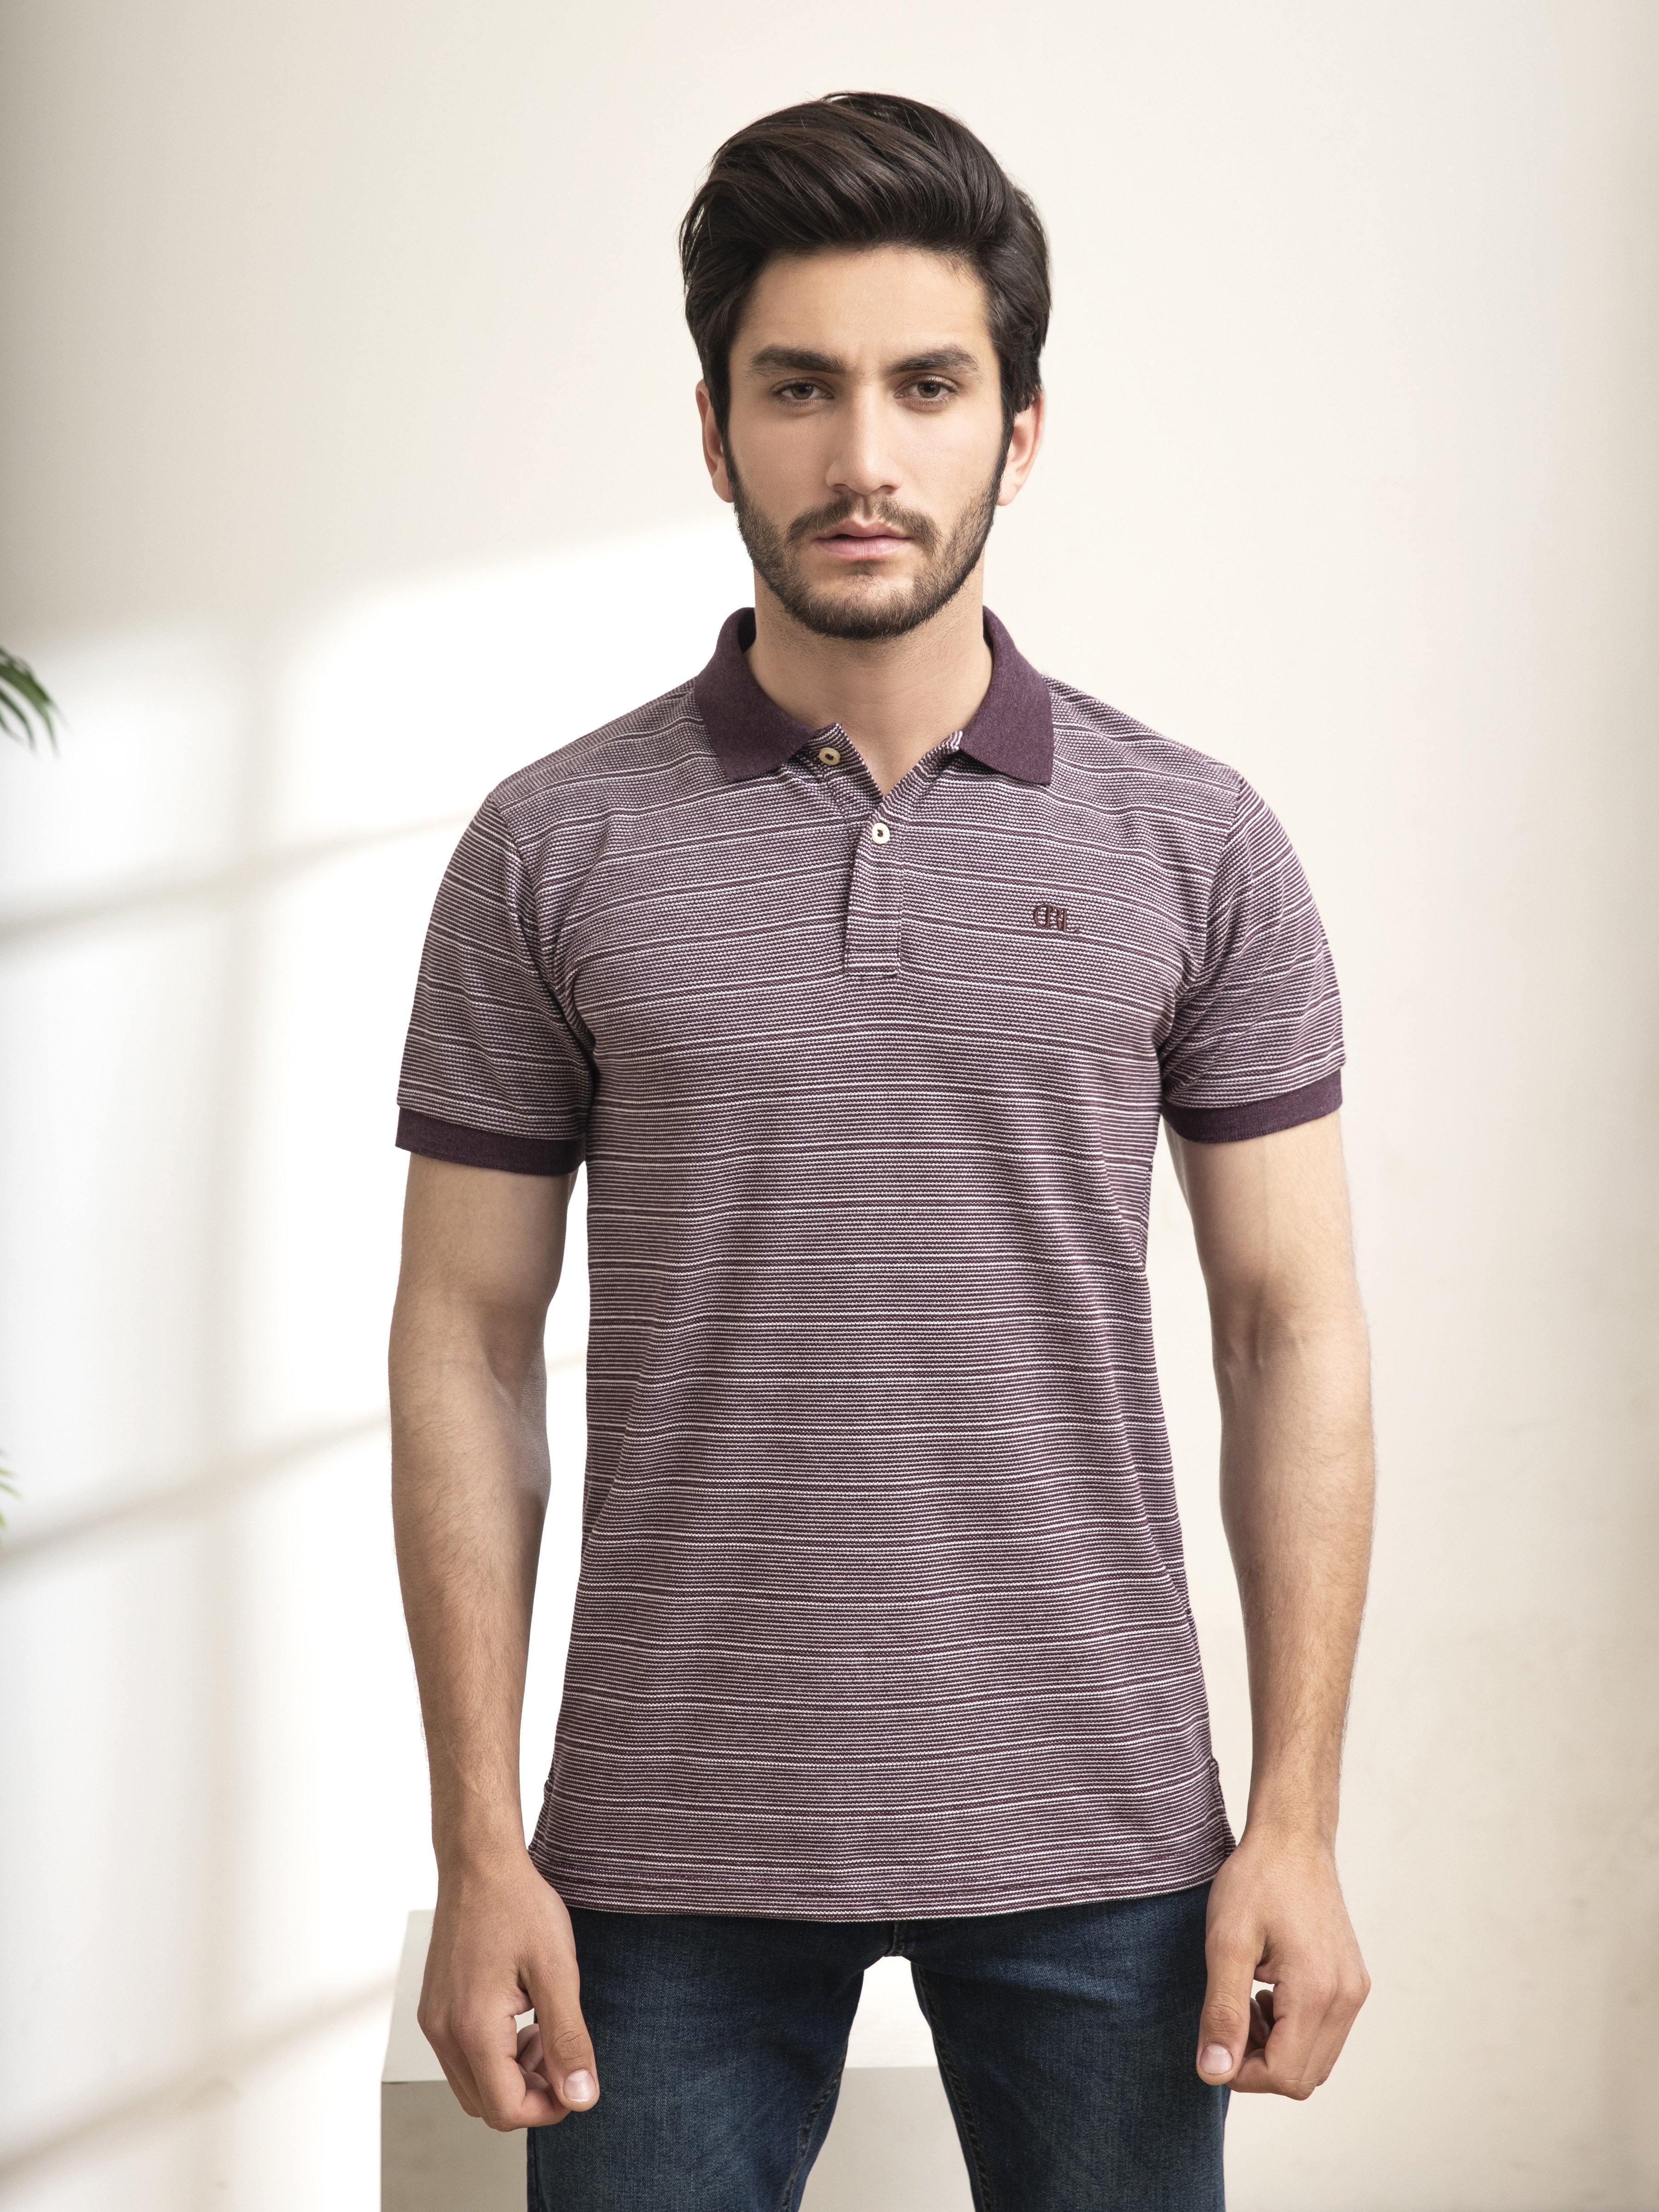 POLO SHIRT DOUBLE TONE MAROON WHITE at Charcoal Clothing